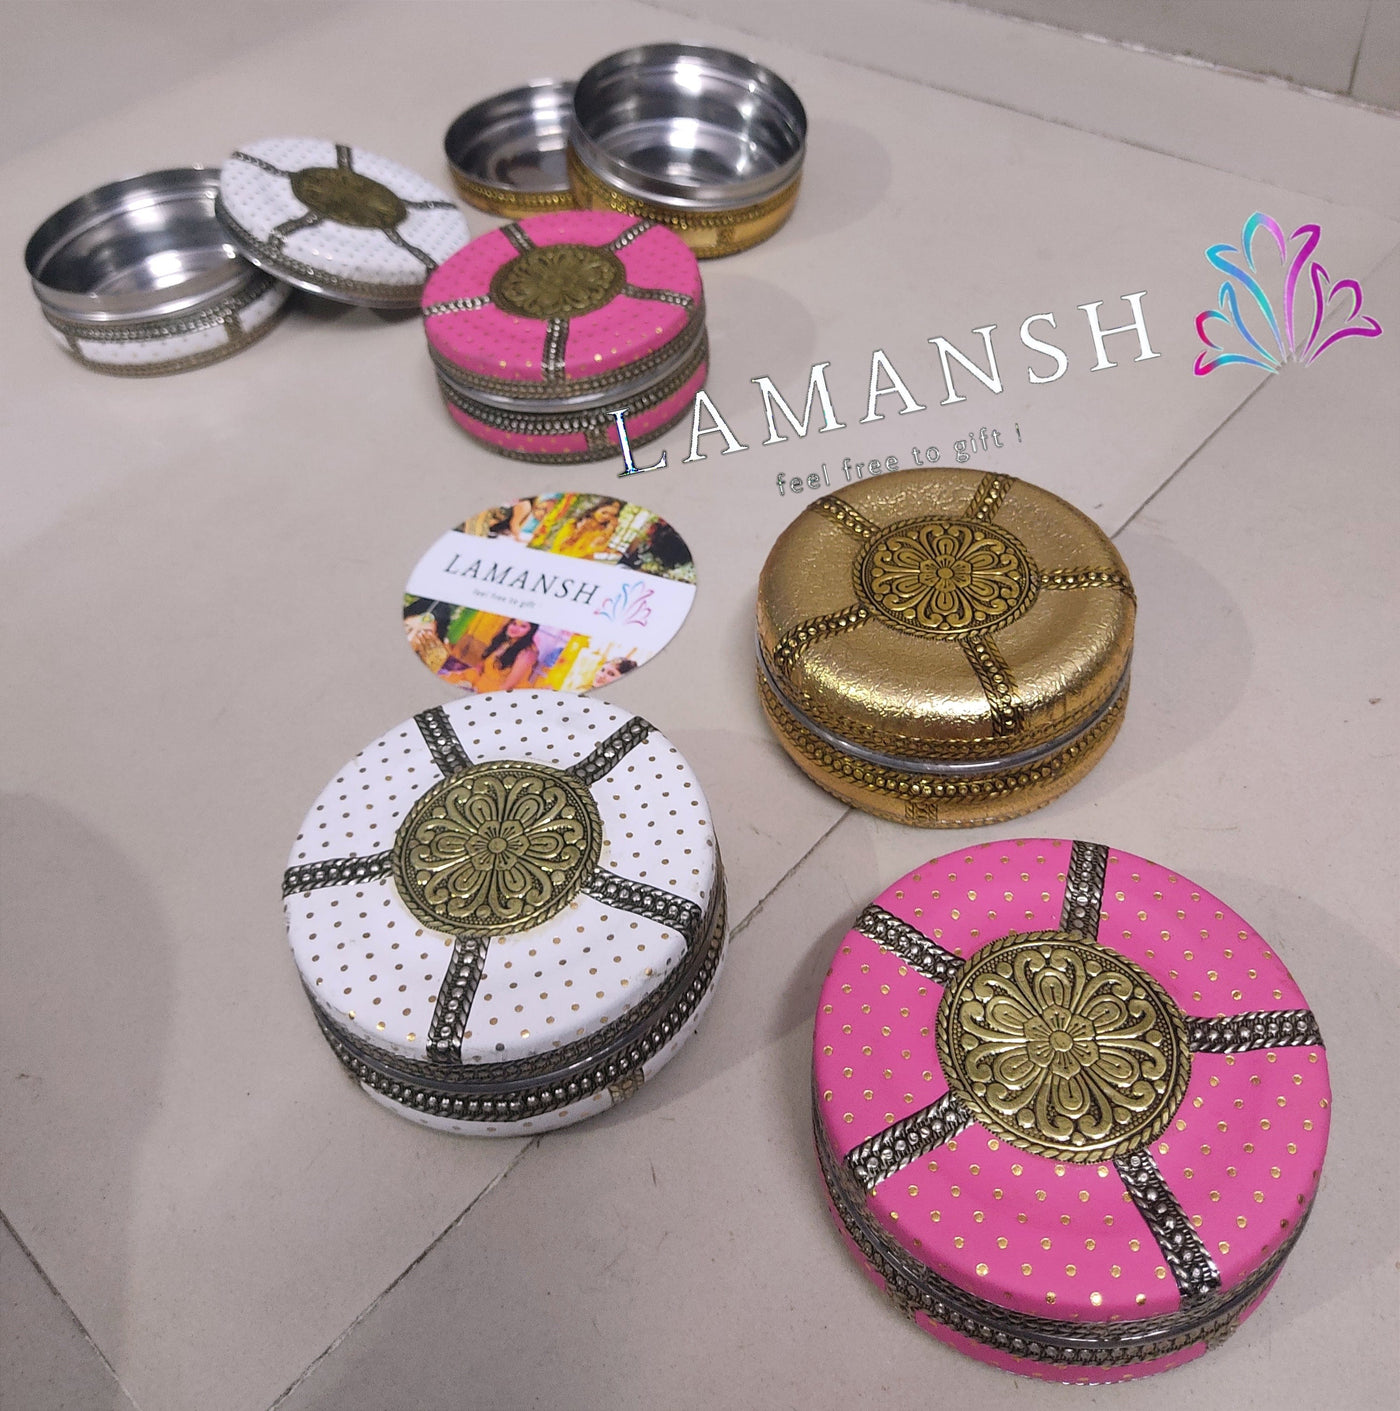 Bangalore Return Gifts Rs.10 | Chickpet Wholesale Steel items And  Kitchenwear Items|Onlineshopping - YouTube